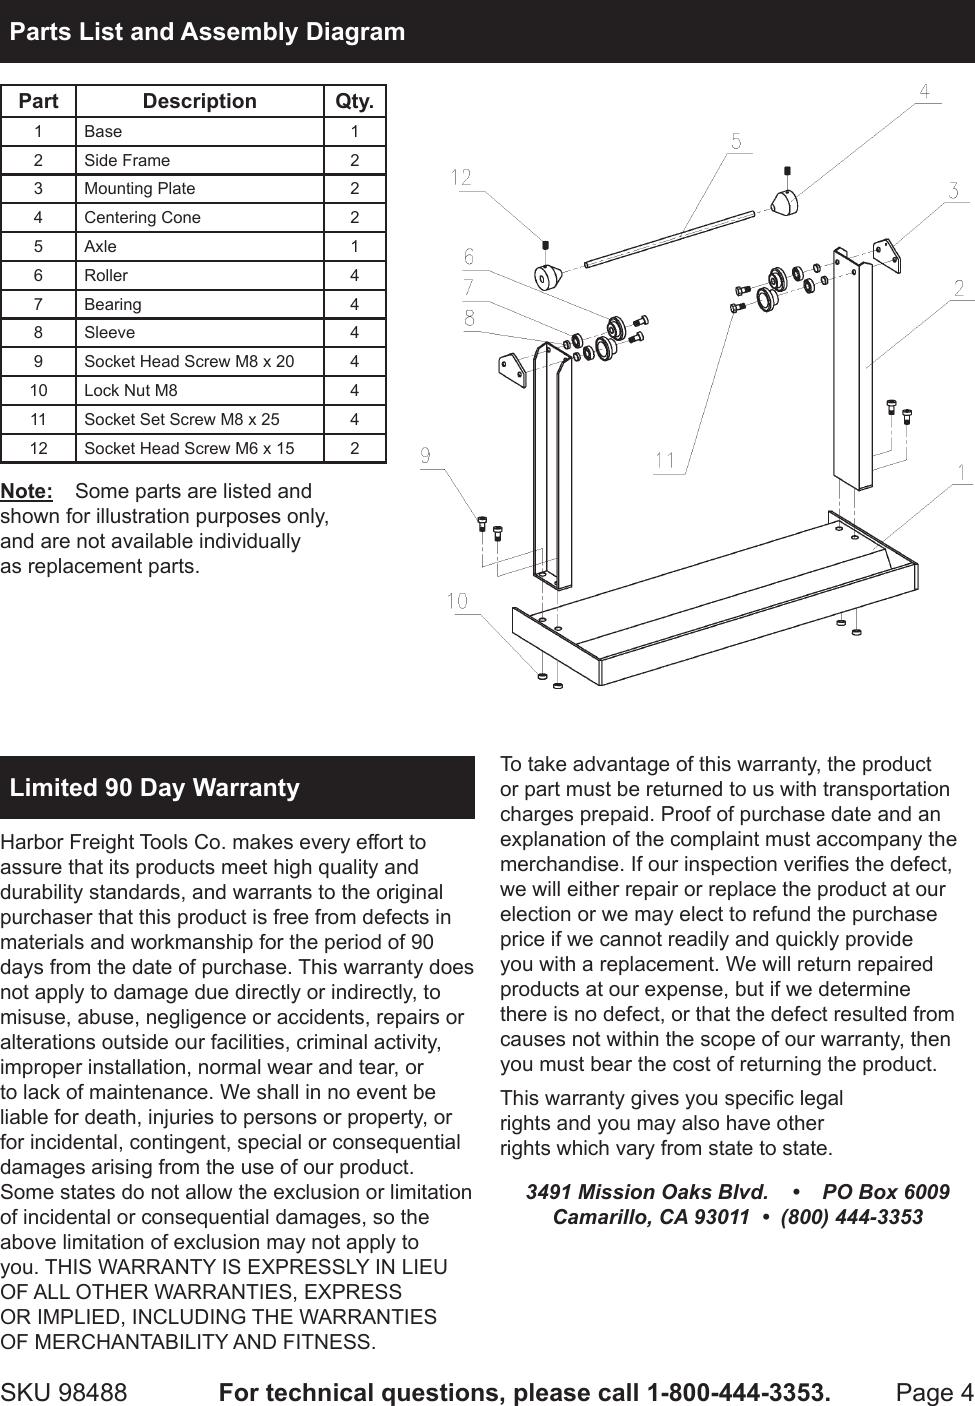 Page 4 of 4 - Harbor-Freight Harbor-Freight-Motorcycle-Wheel-Balancing-Stand-Product-Manual-  Harbor-freight-motorcycle-wheel-balancing-stand-product-manual